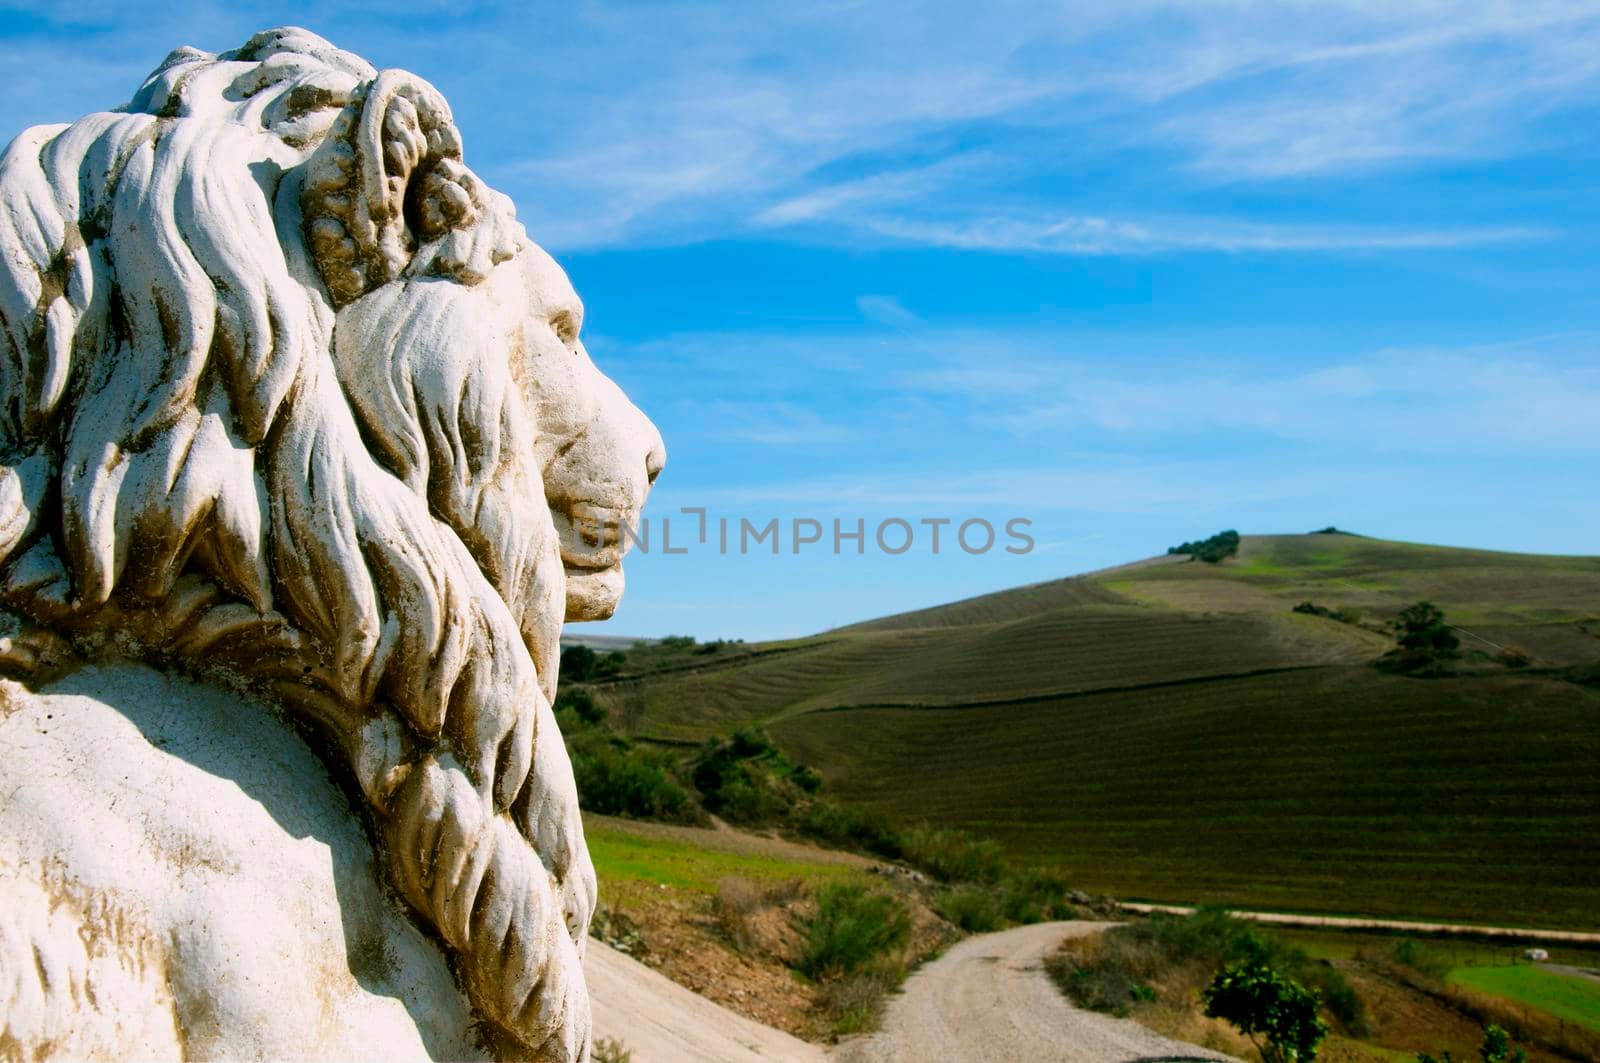 Head of lion sculpture looking at the road in the field background, Spain